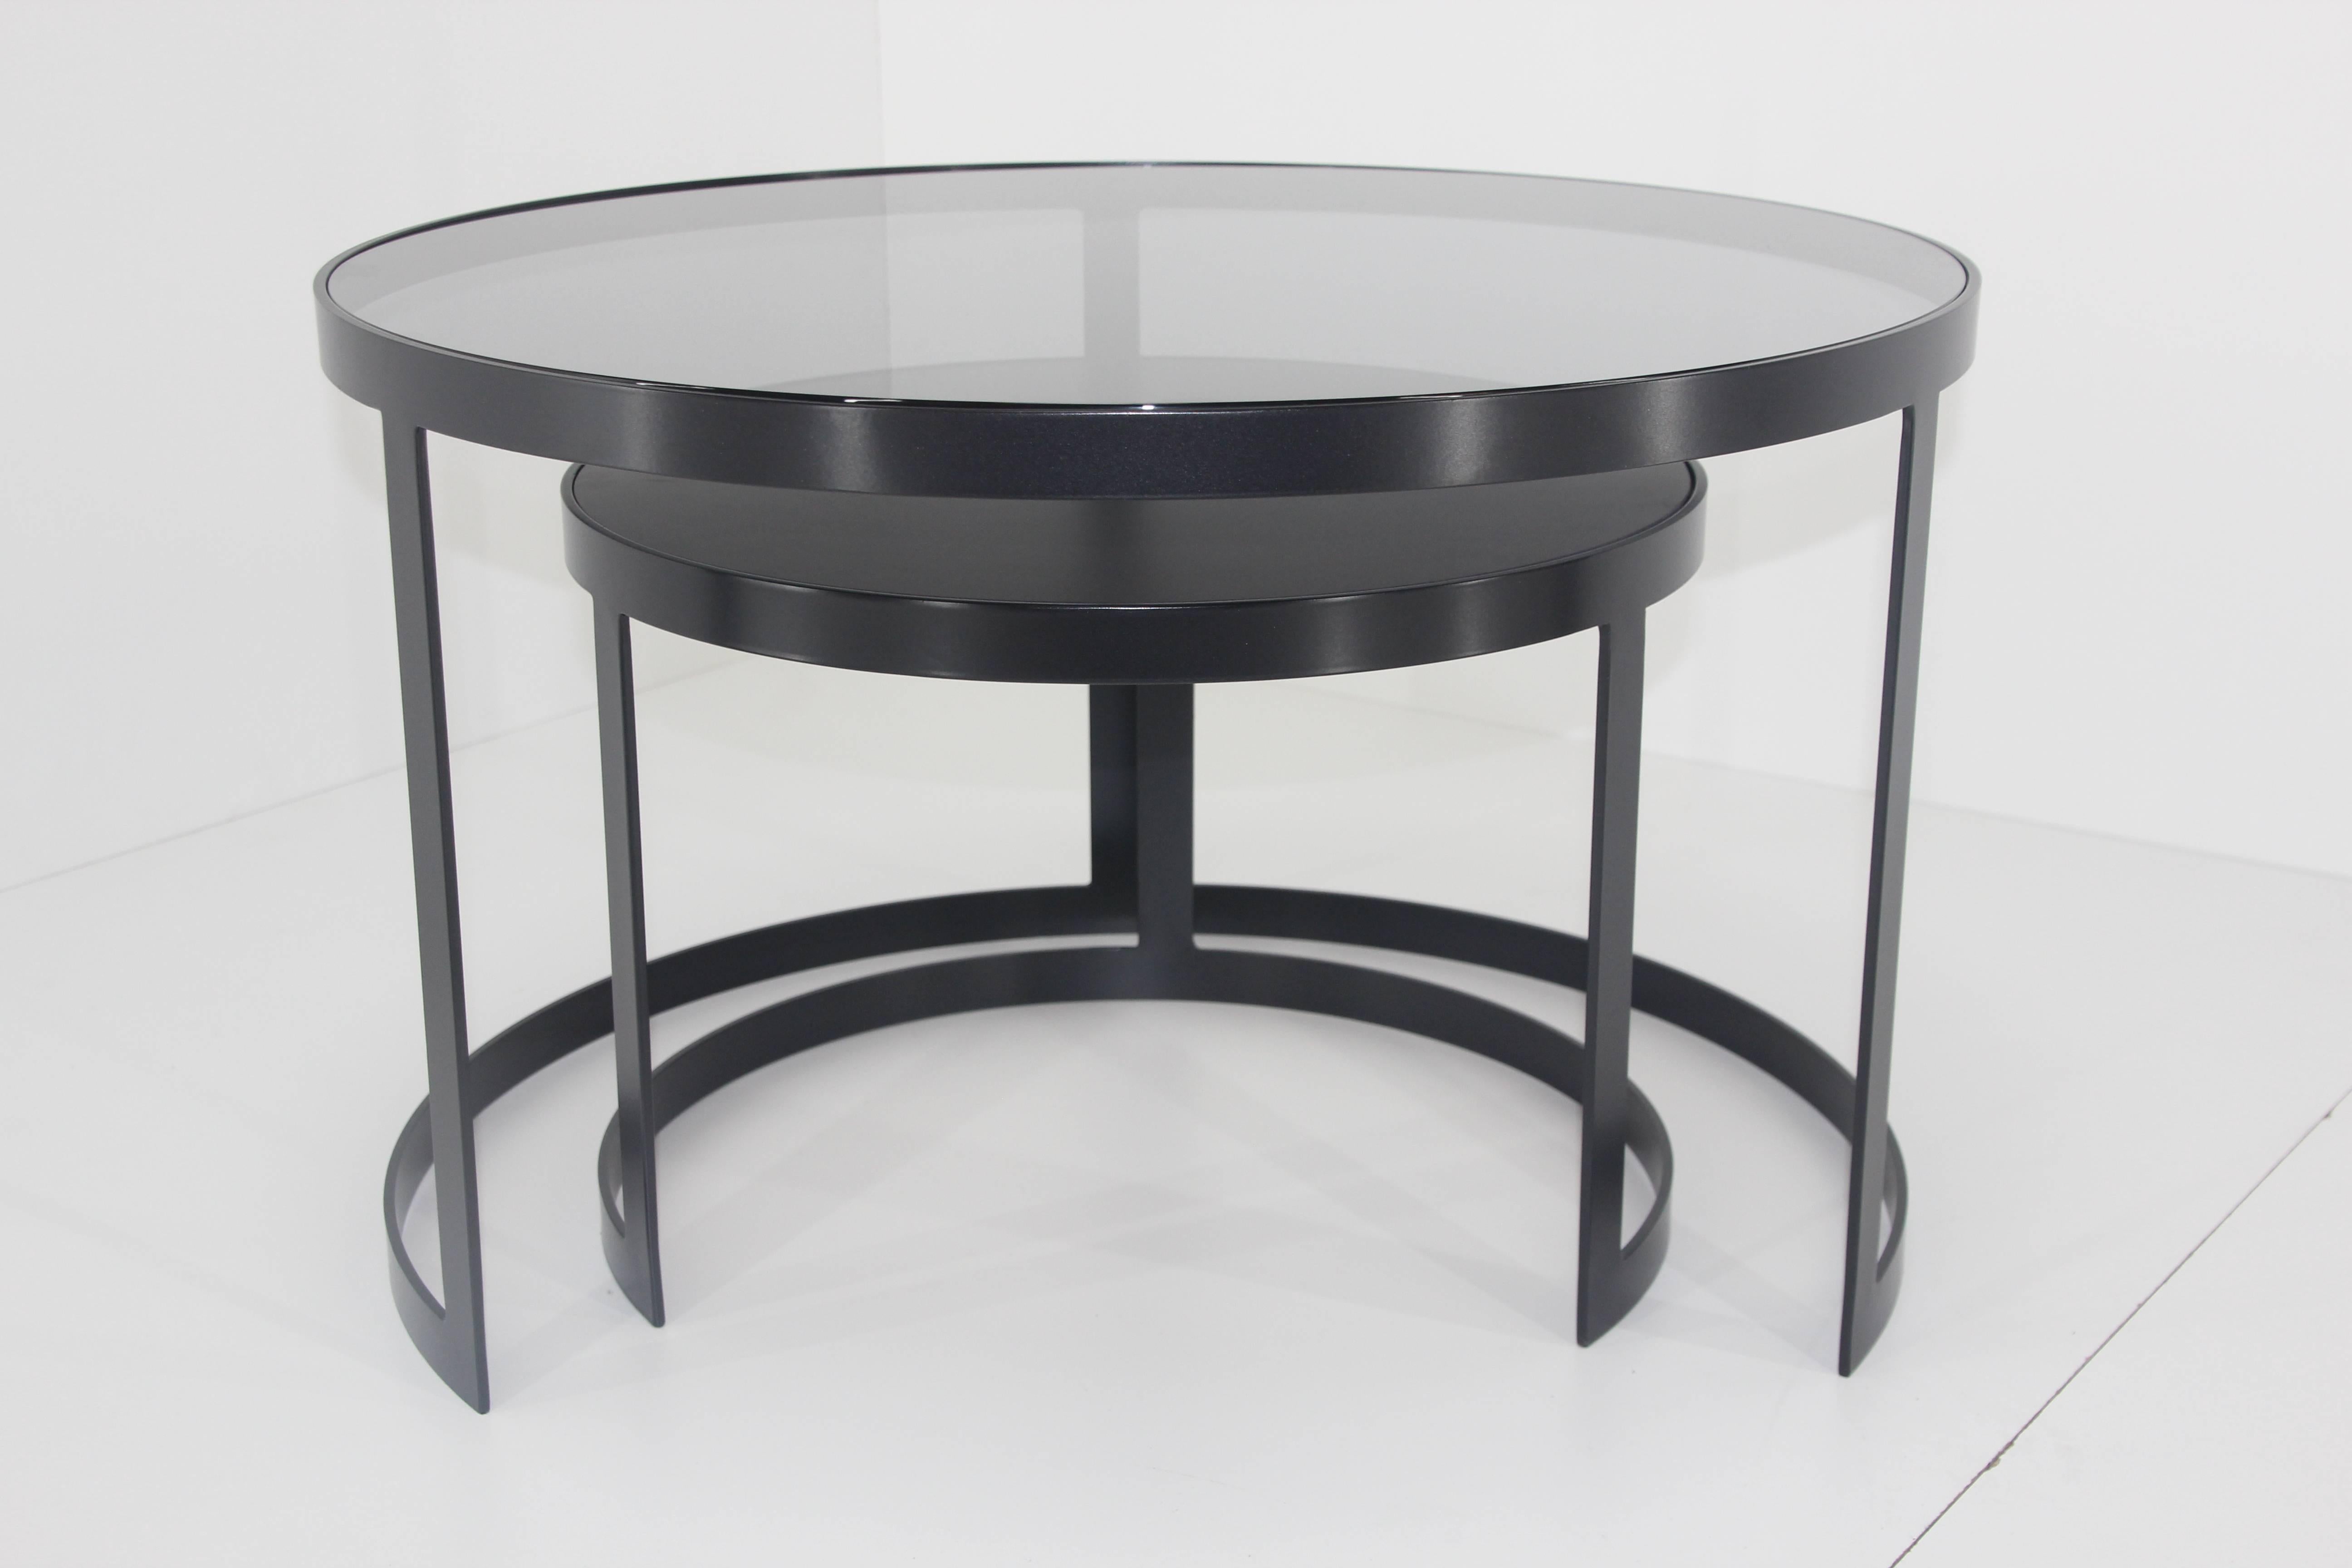 21st century set of two iron nesting tables with glass and wood tops, Spain

Frame material: Extruded and hand-welded Iron rods
Frame finish: Black 
Iron rods dimensions: 1.96 in x 0.1 in
Top: 0.4in. wood / 0.4in. glass

Table